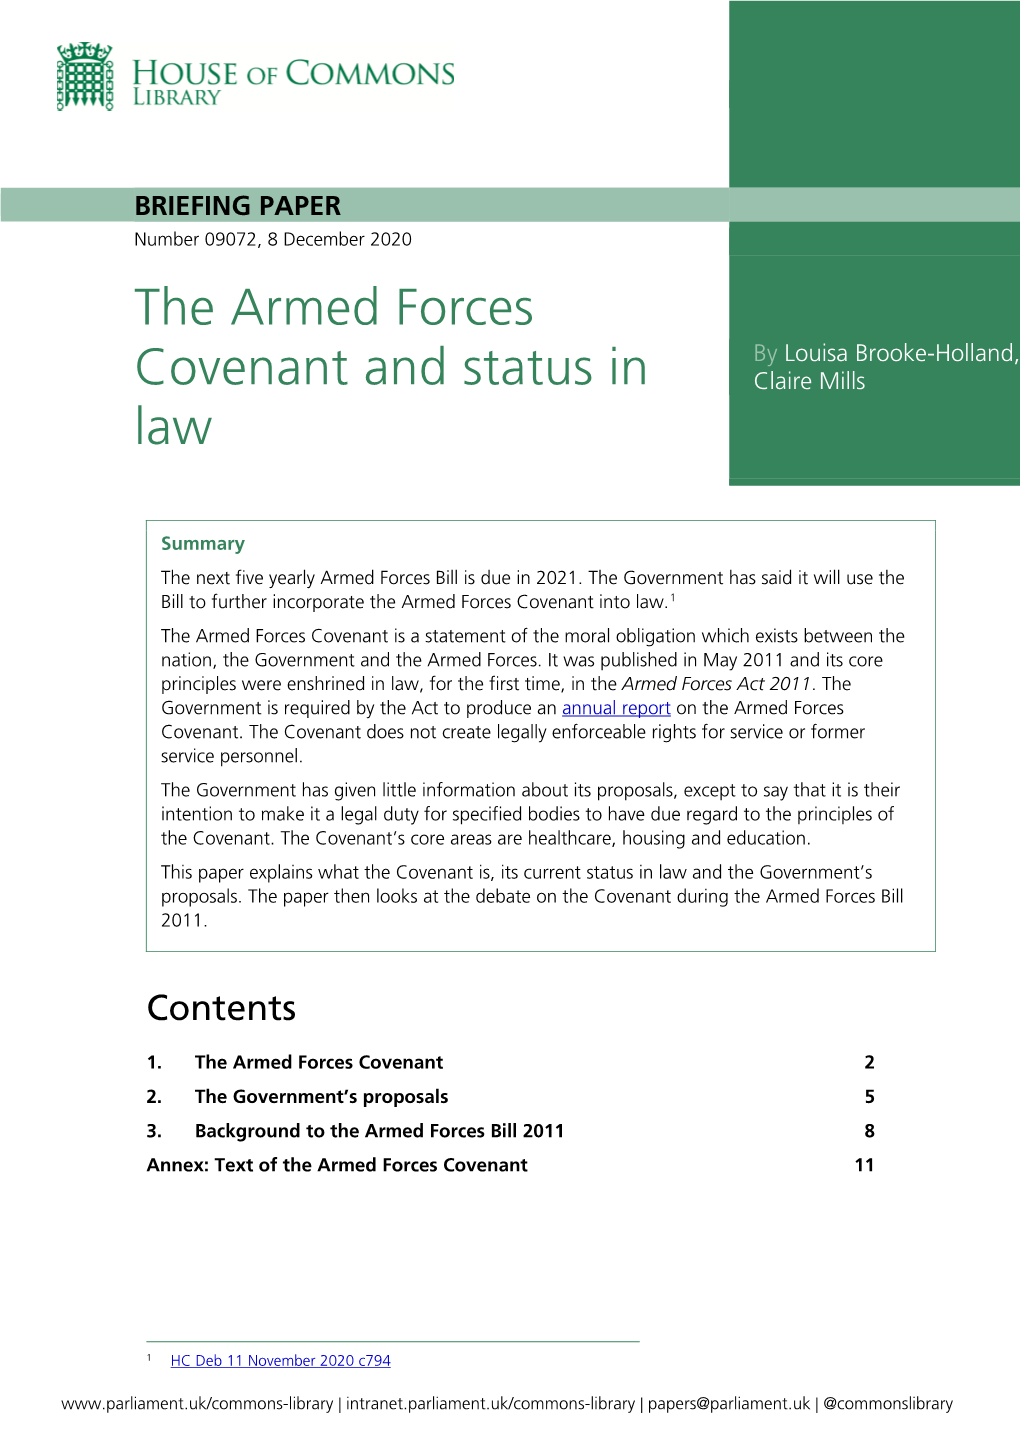 The Armed Forces Covenant and Status in Law